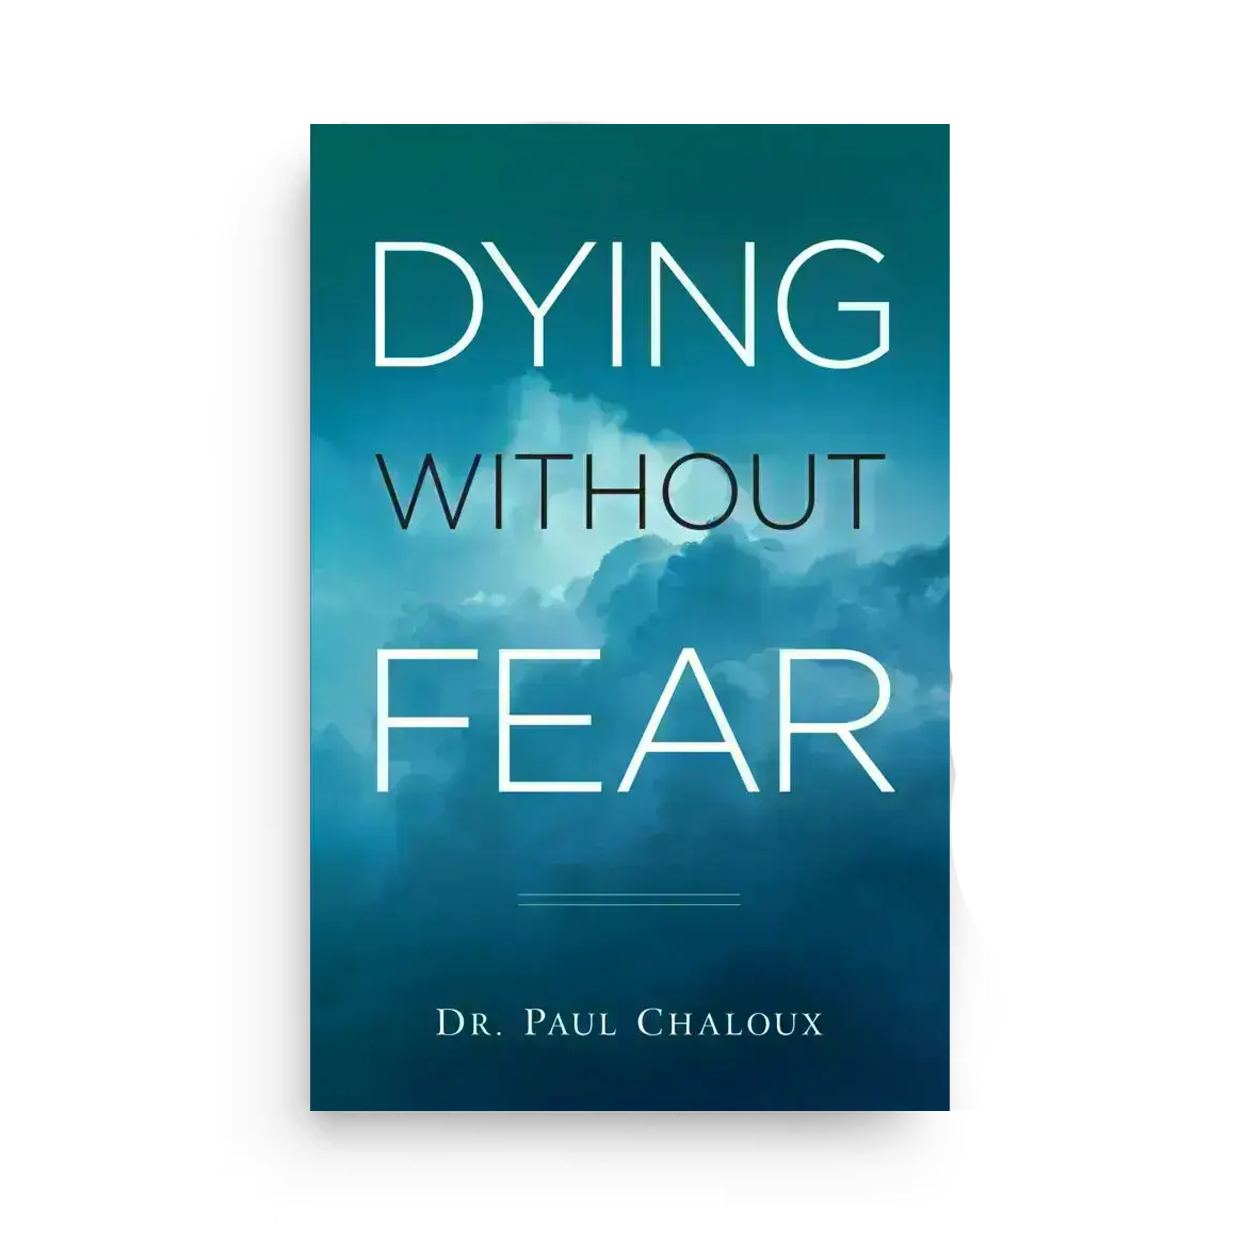 Dying Without Fear